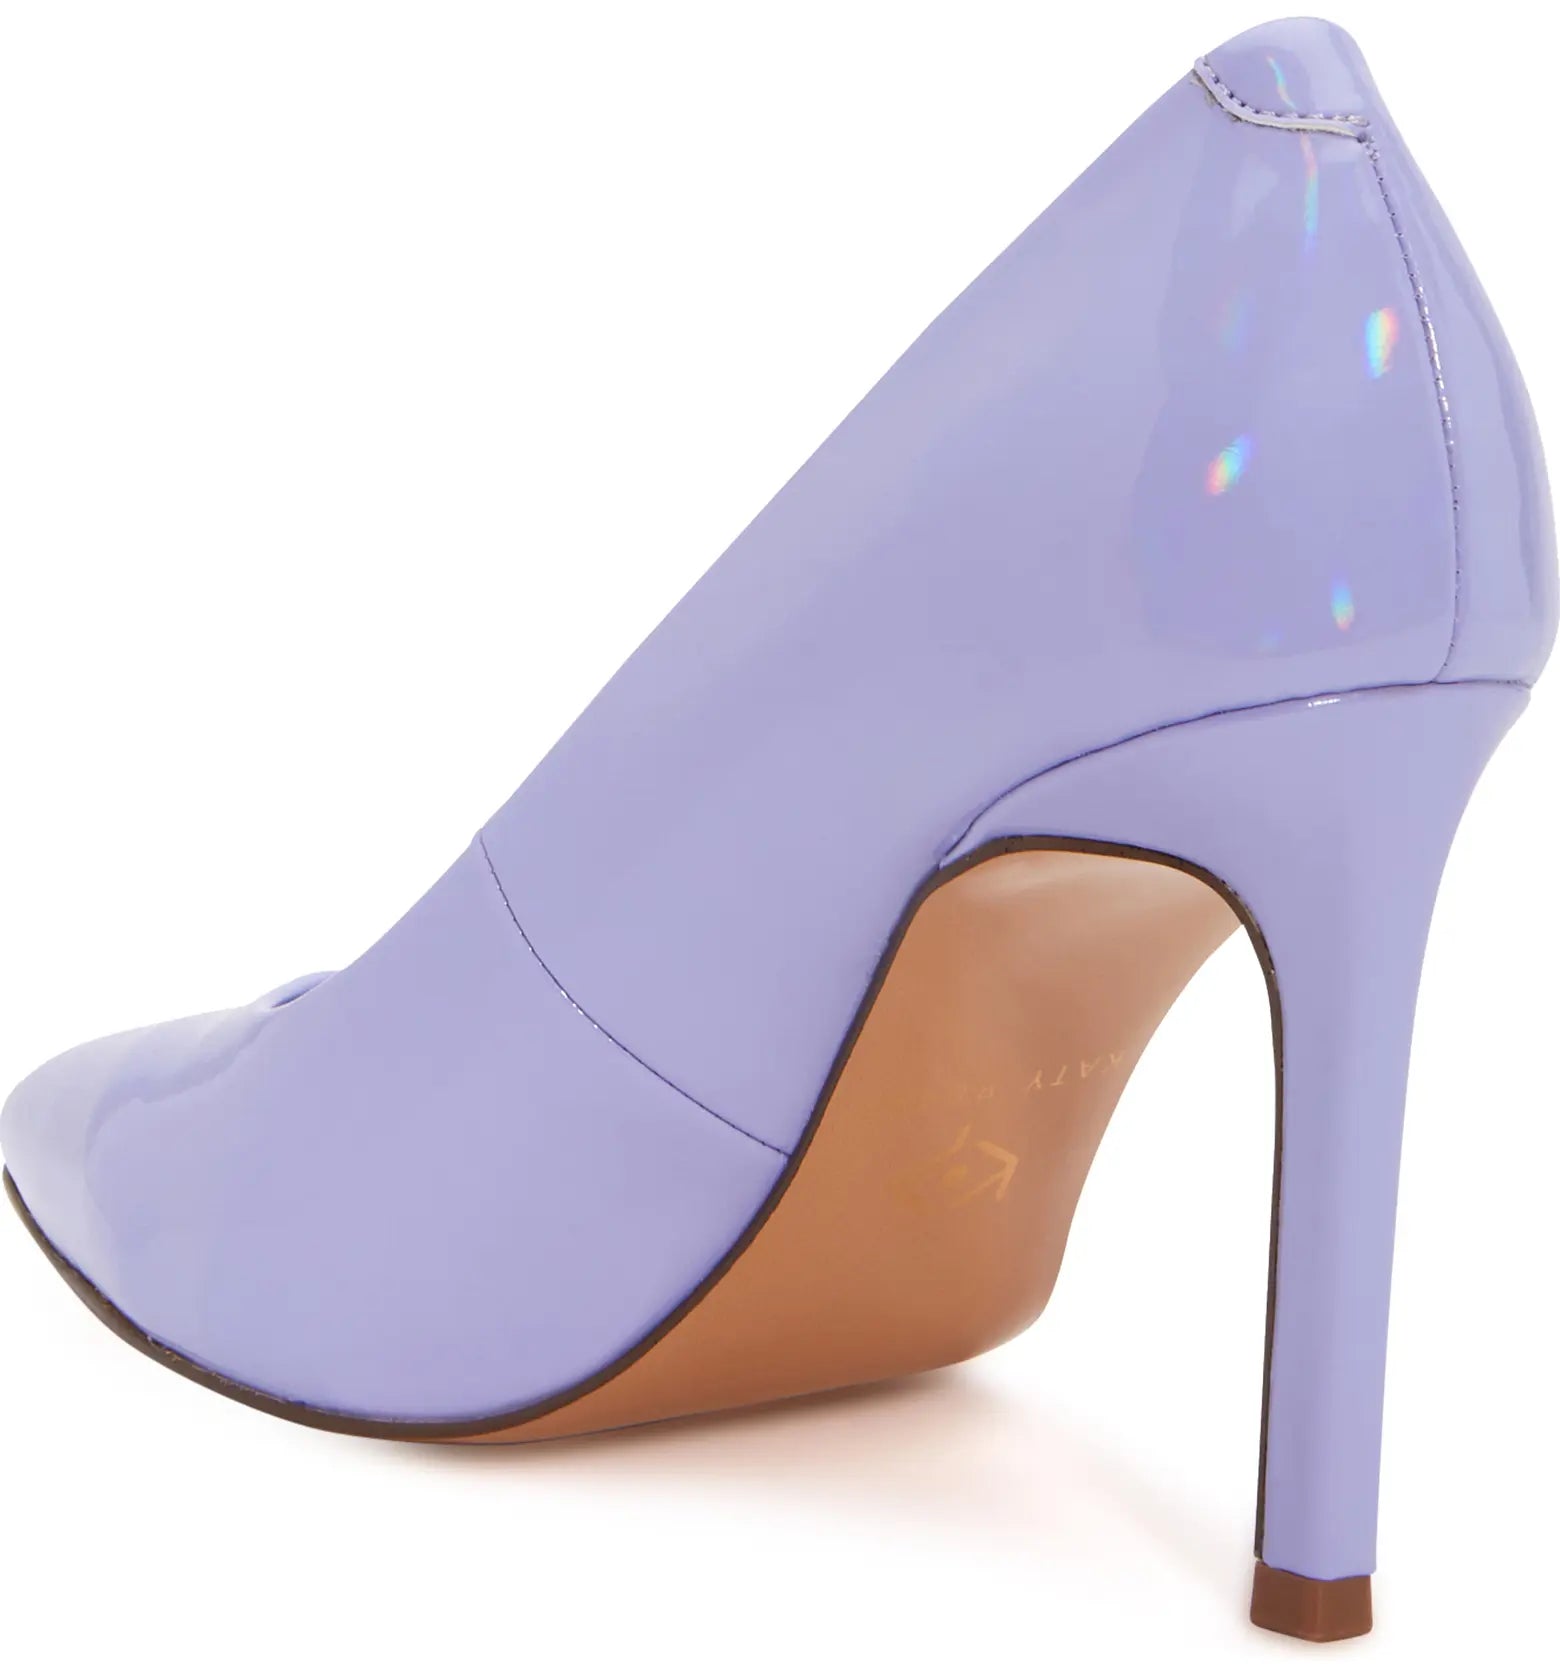 KATY PERRY LILAC PATENT LEATHER CARAMEL POINTED TOE PUMP